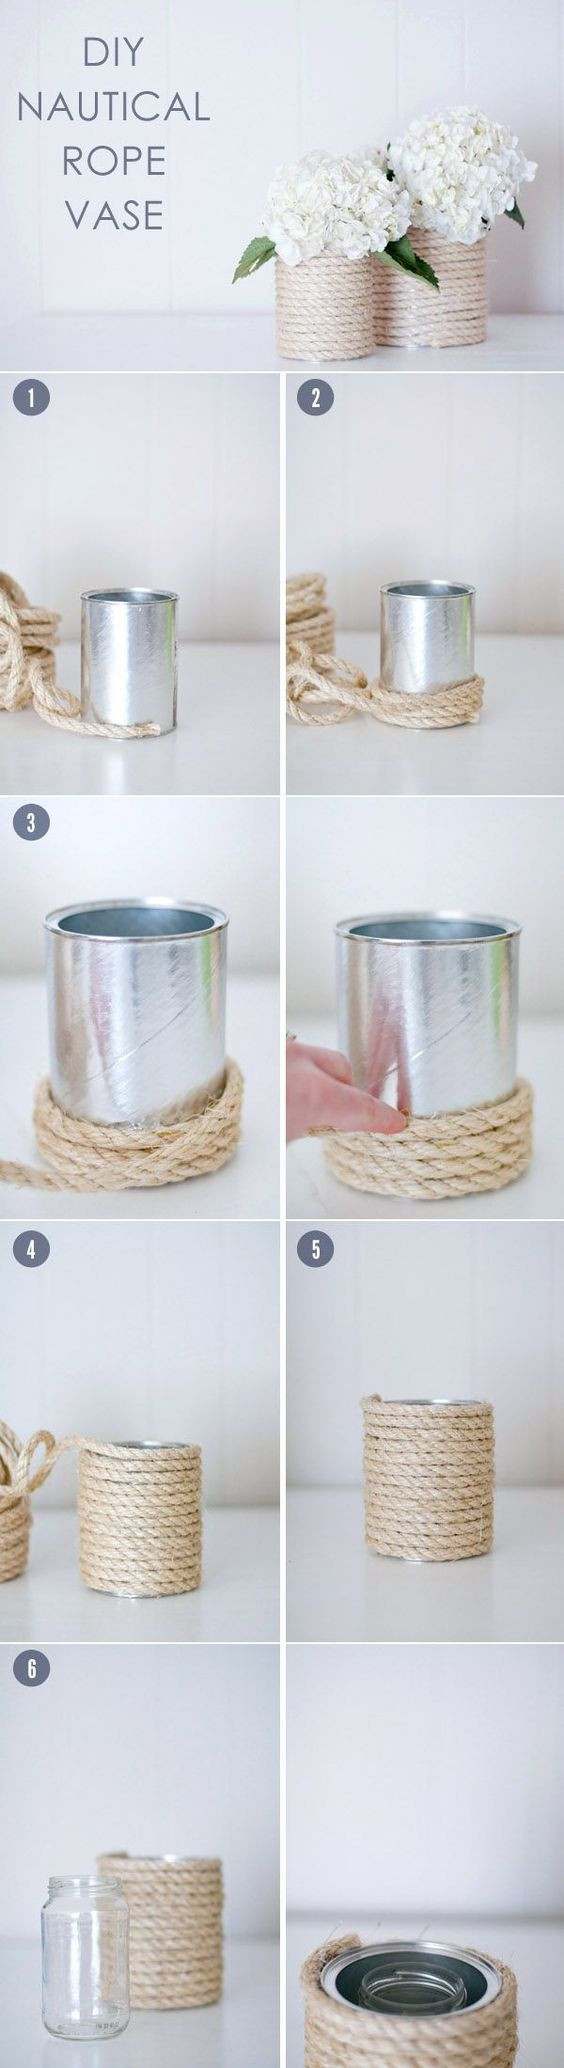 DIY Nautical Decor
 30 DIY Nautical Decor Projects Bringing the Beach To your Home